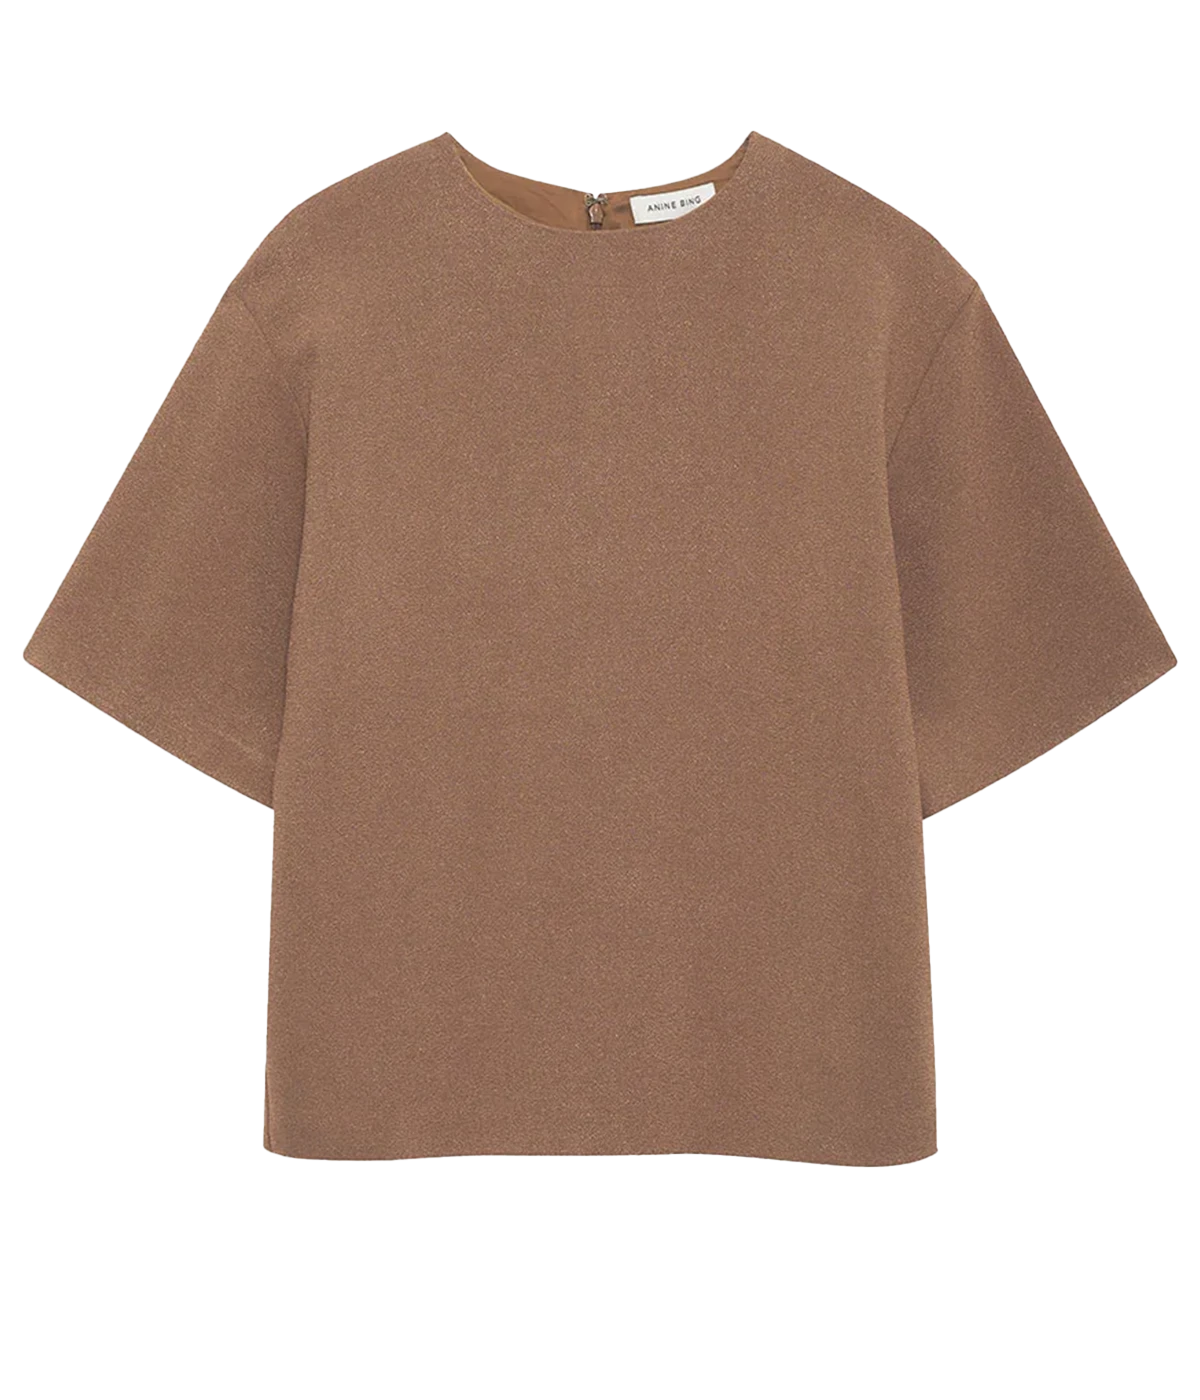 Maddie Top in Camel